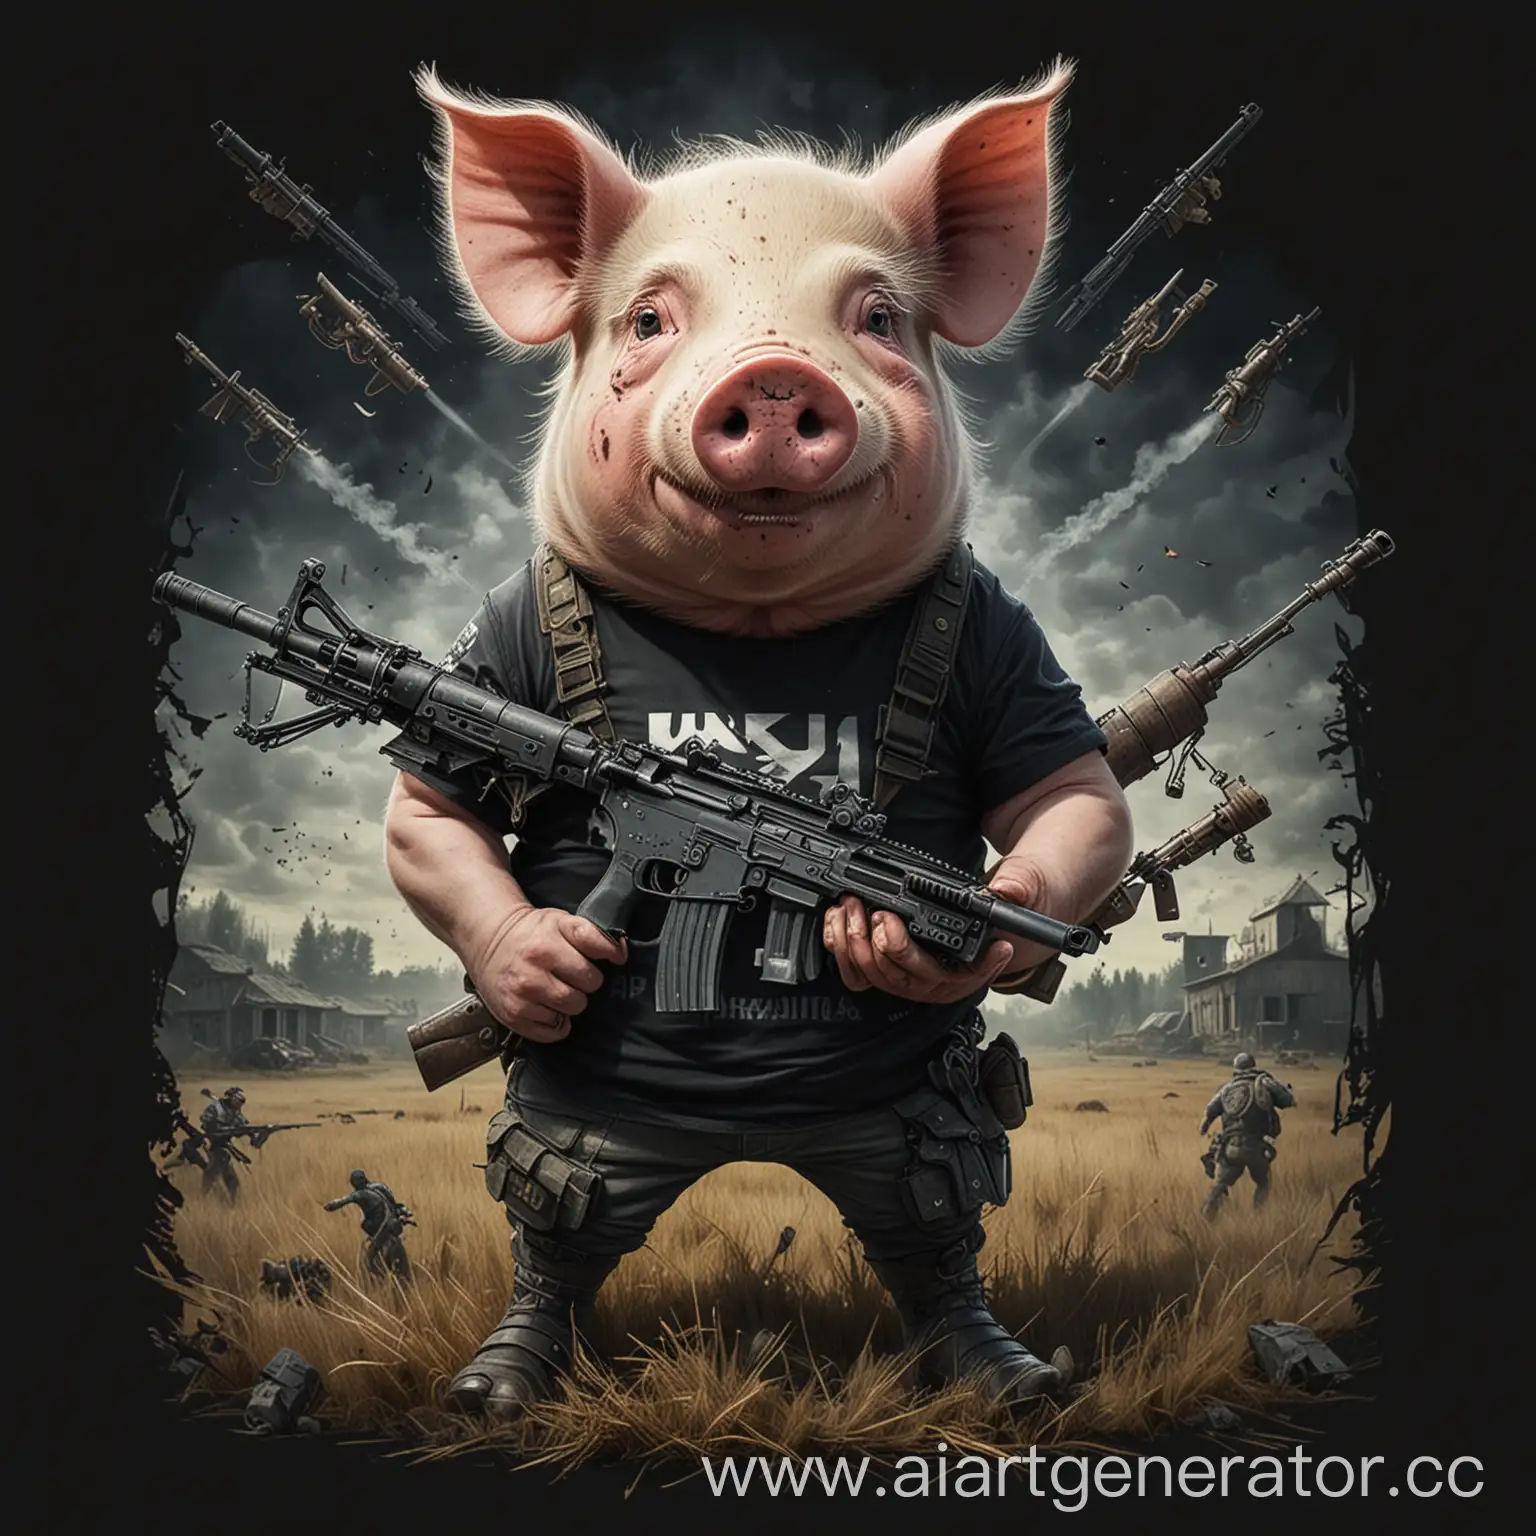 Mystical-Pig-Warrior-Ukrainian-Mythological-Creature-Wielding-Automatic-Weapon-in-Field